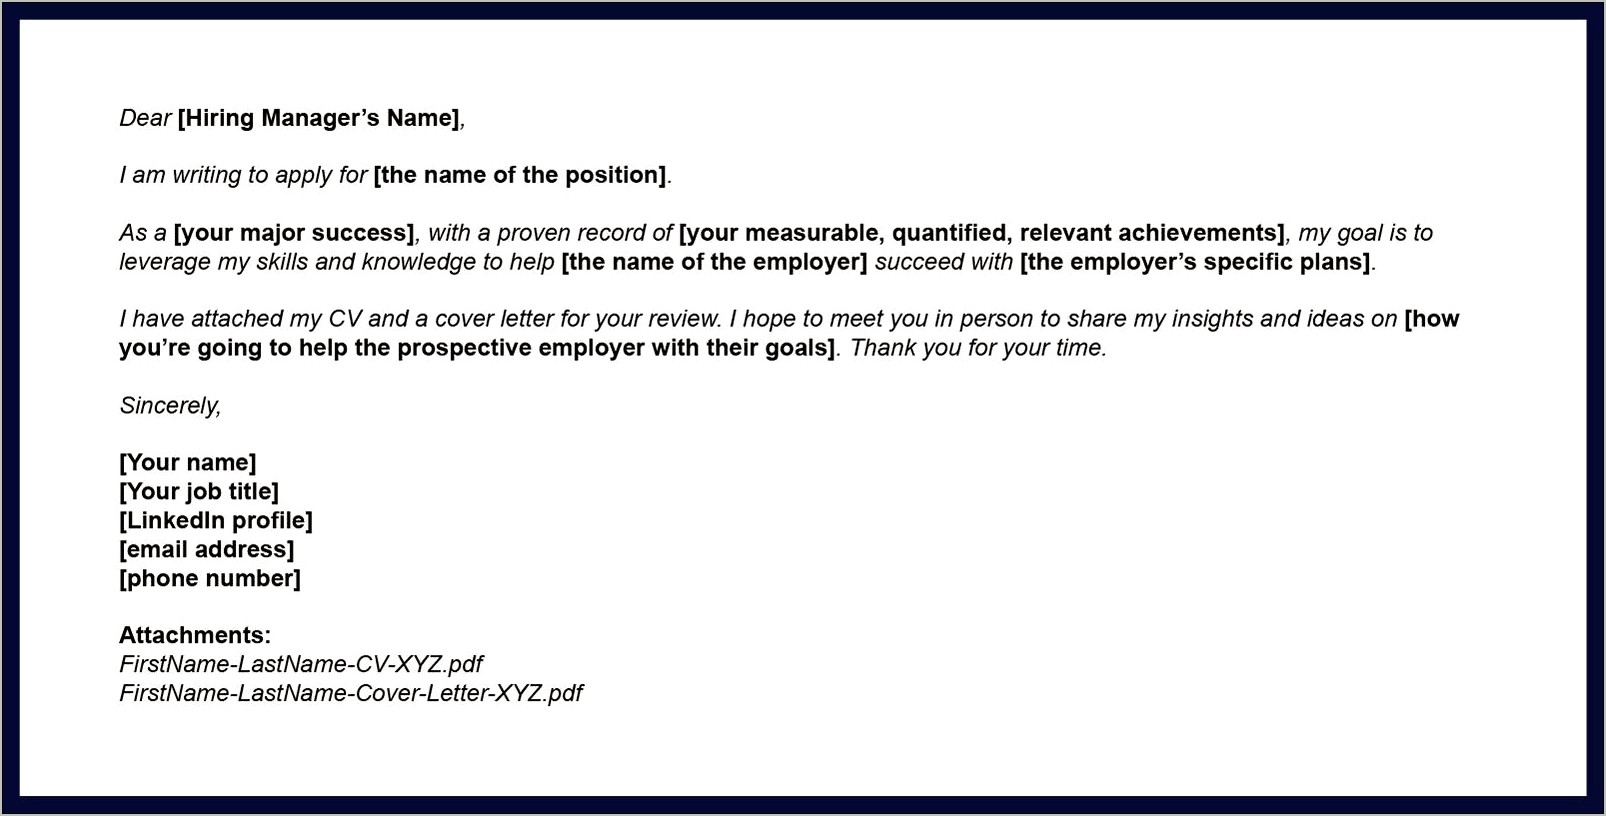 Email For Attaching Resume And Cover Letter